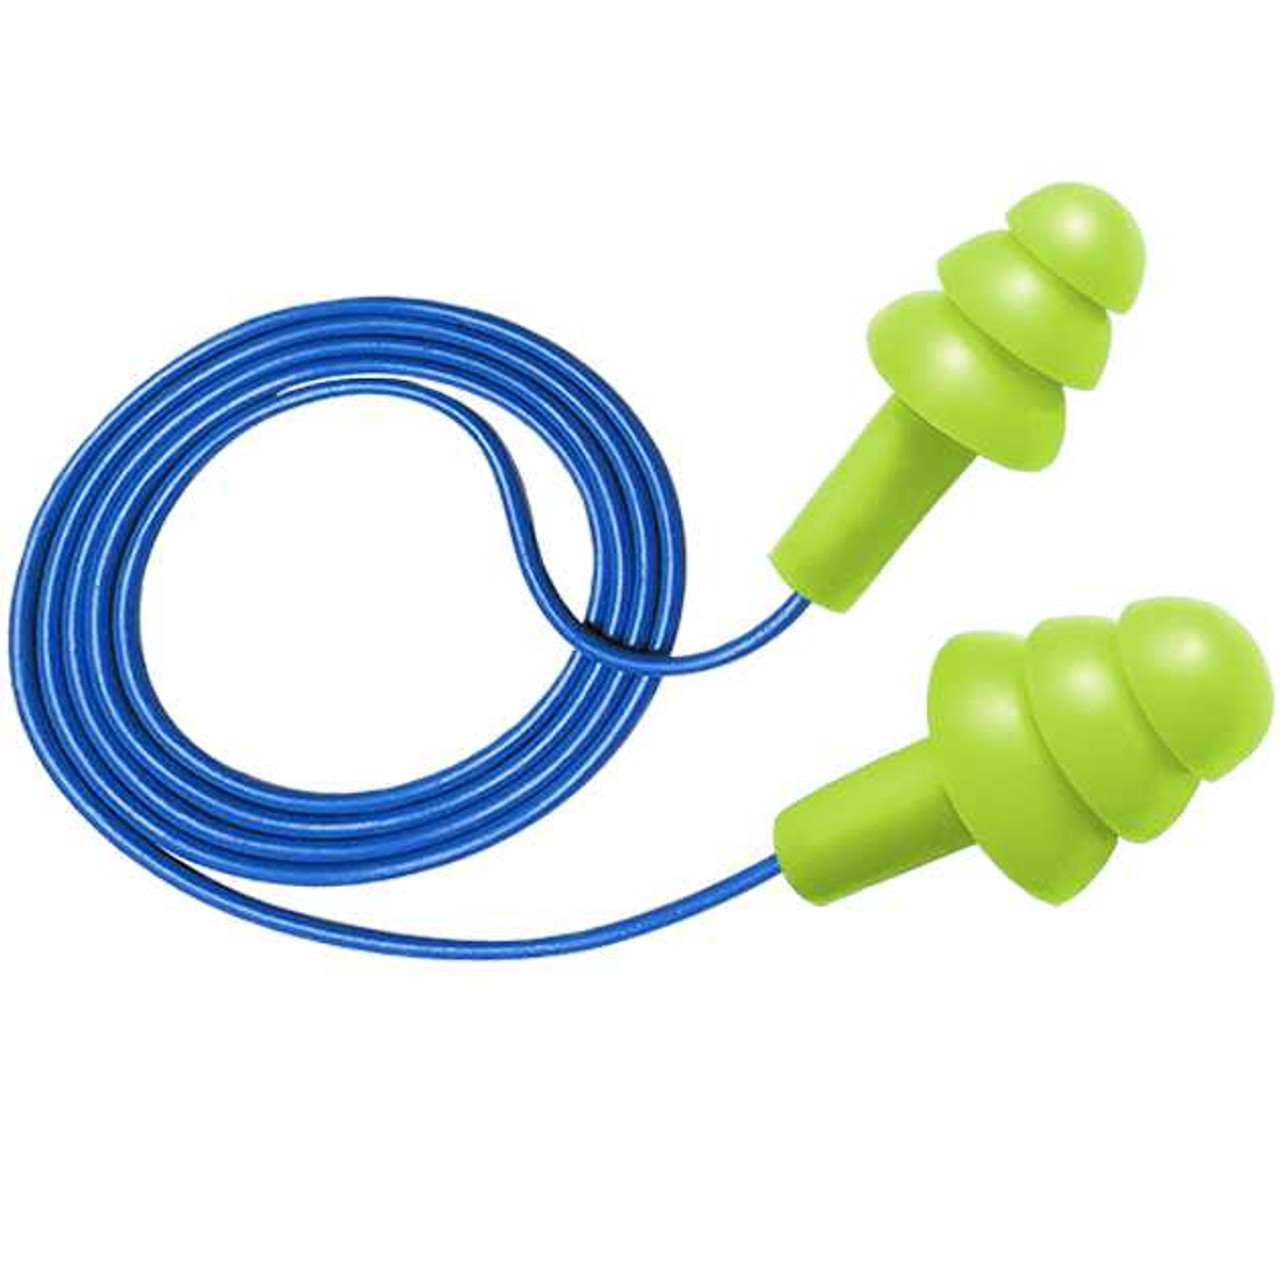 Hush™ 50-23C, 3 Flanged Reusable Earplug, Corded, NRR 25 (1,000 pairs / case)